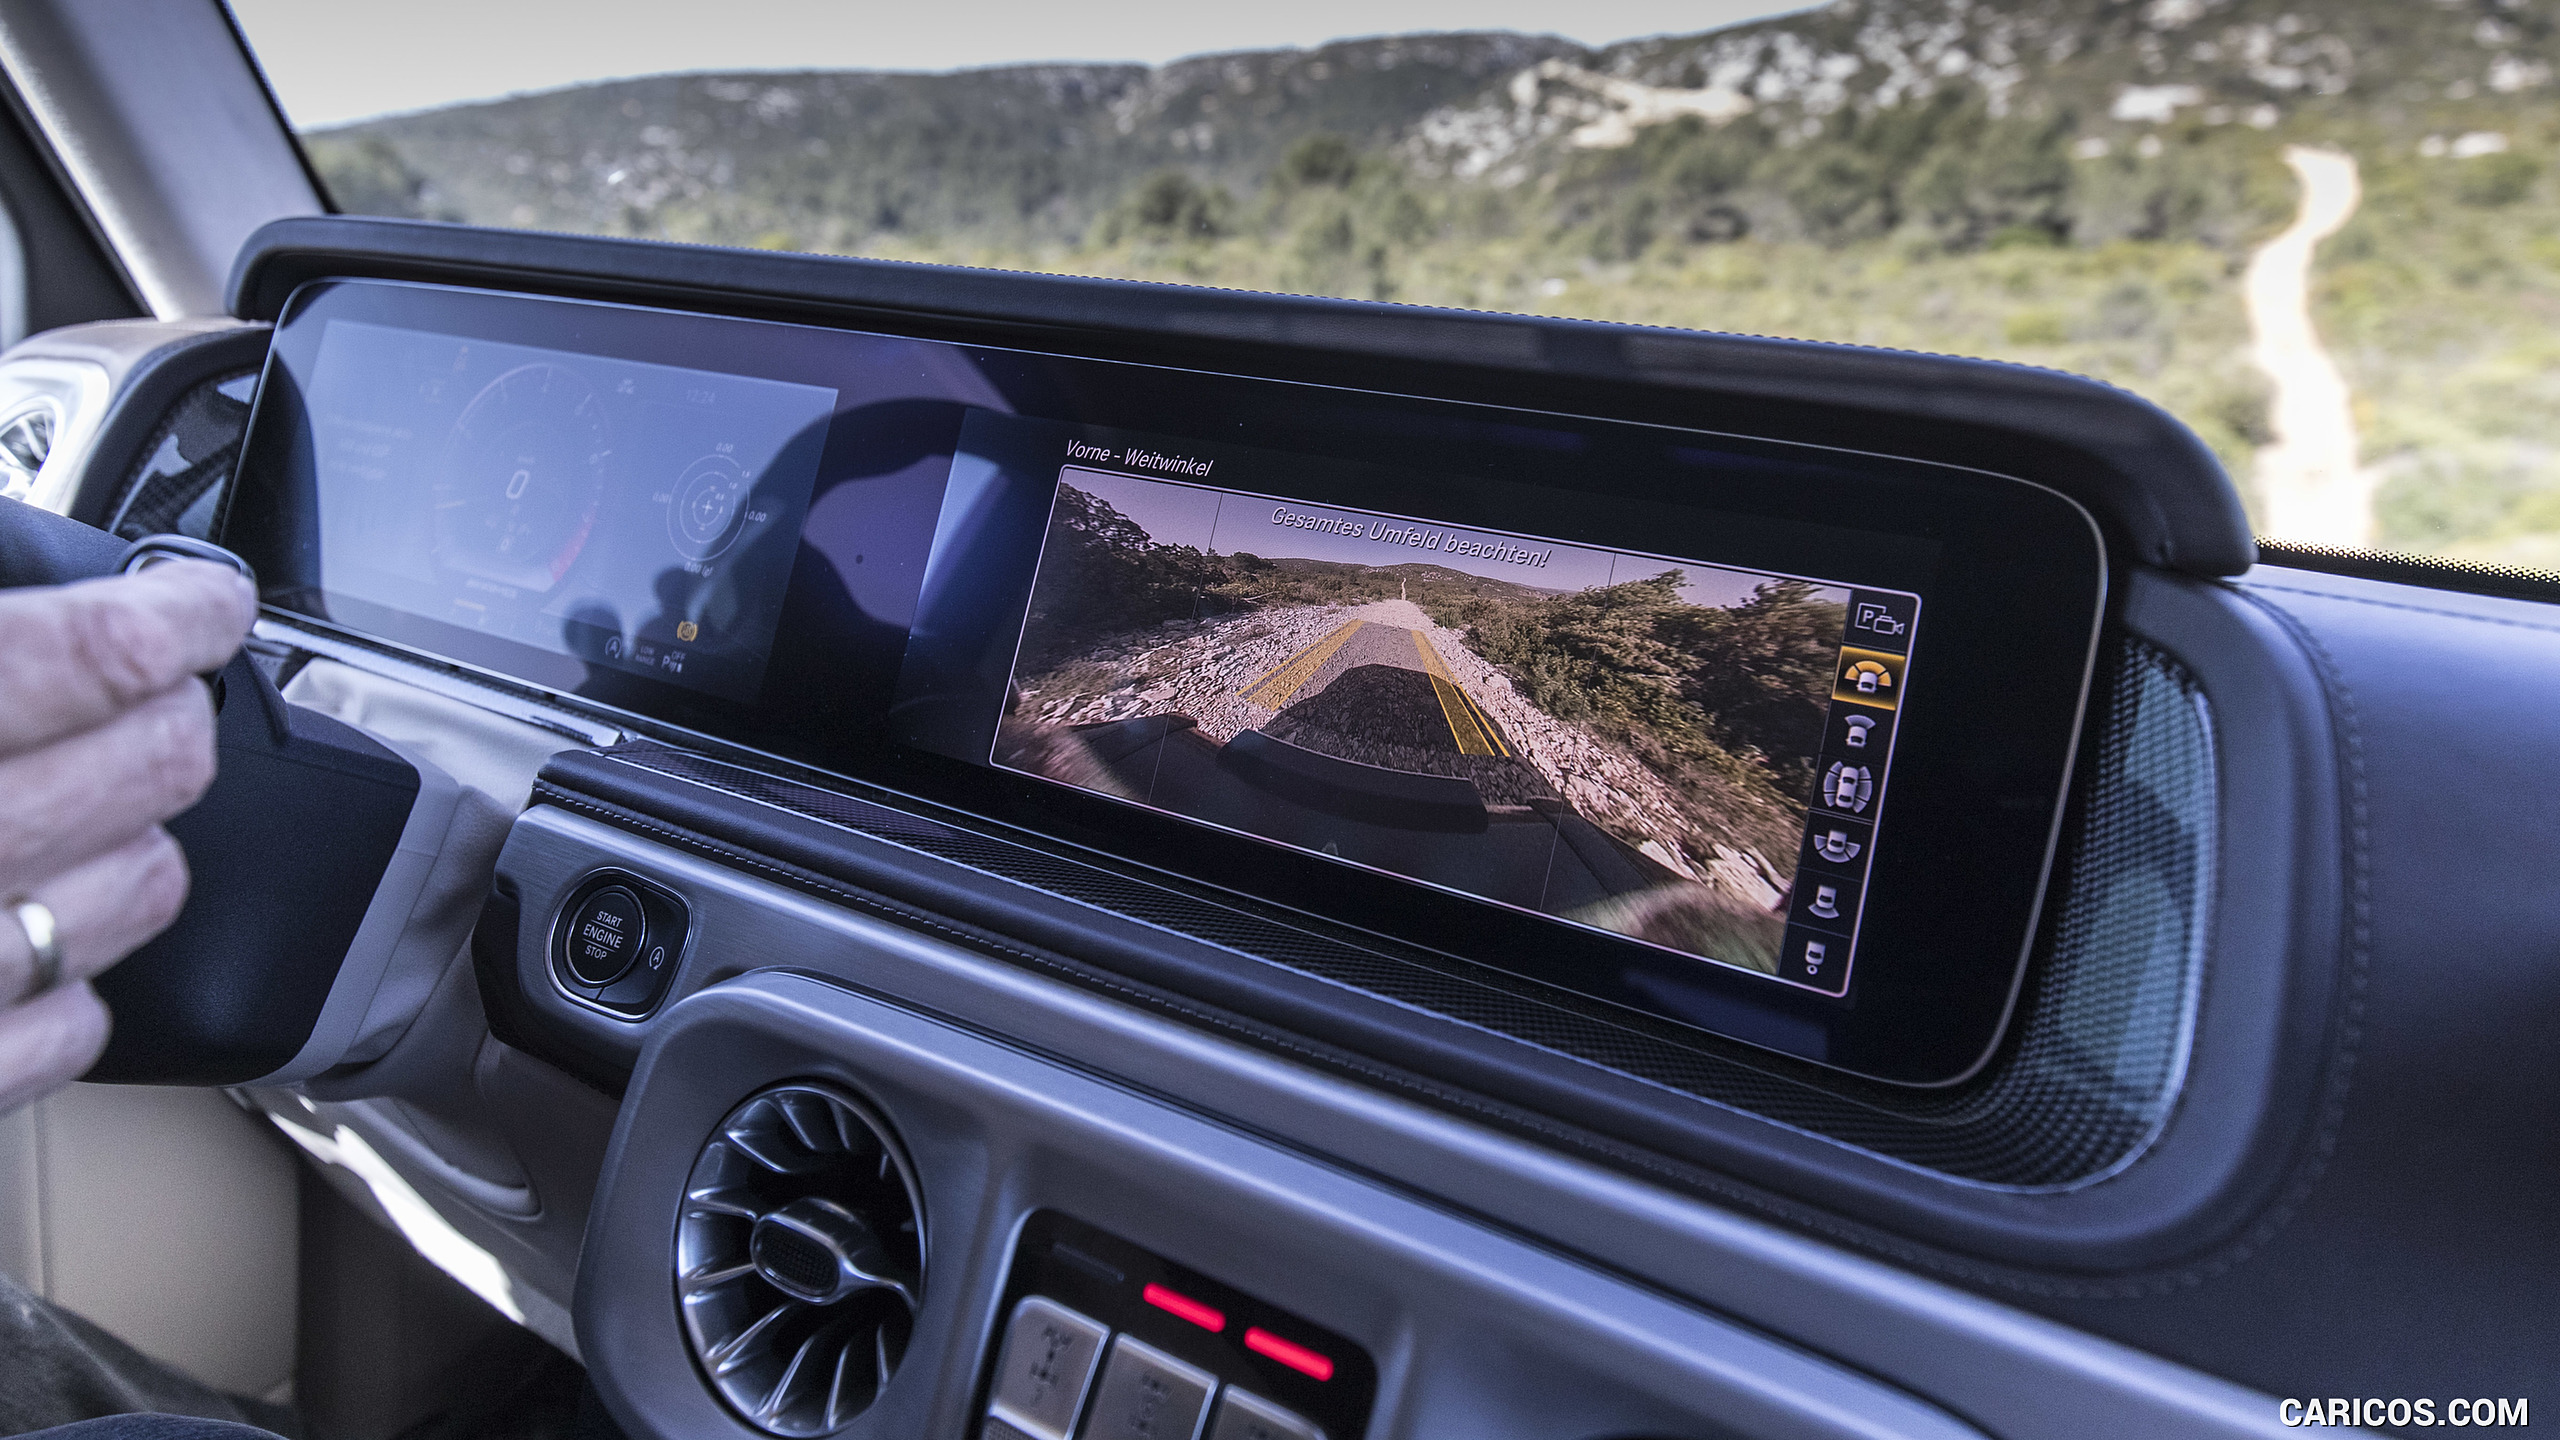 2019 Mercedes-AMG G63 - Central Console, #205 of 452